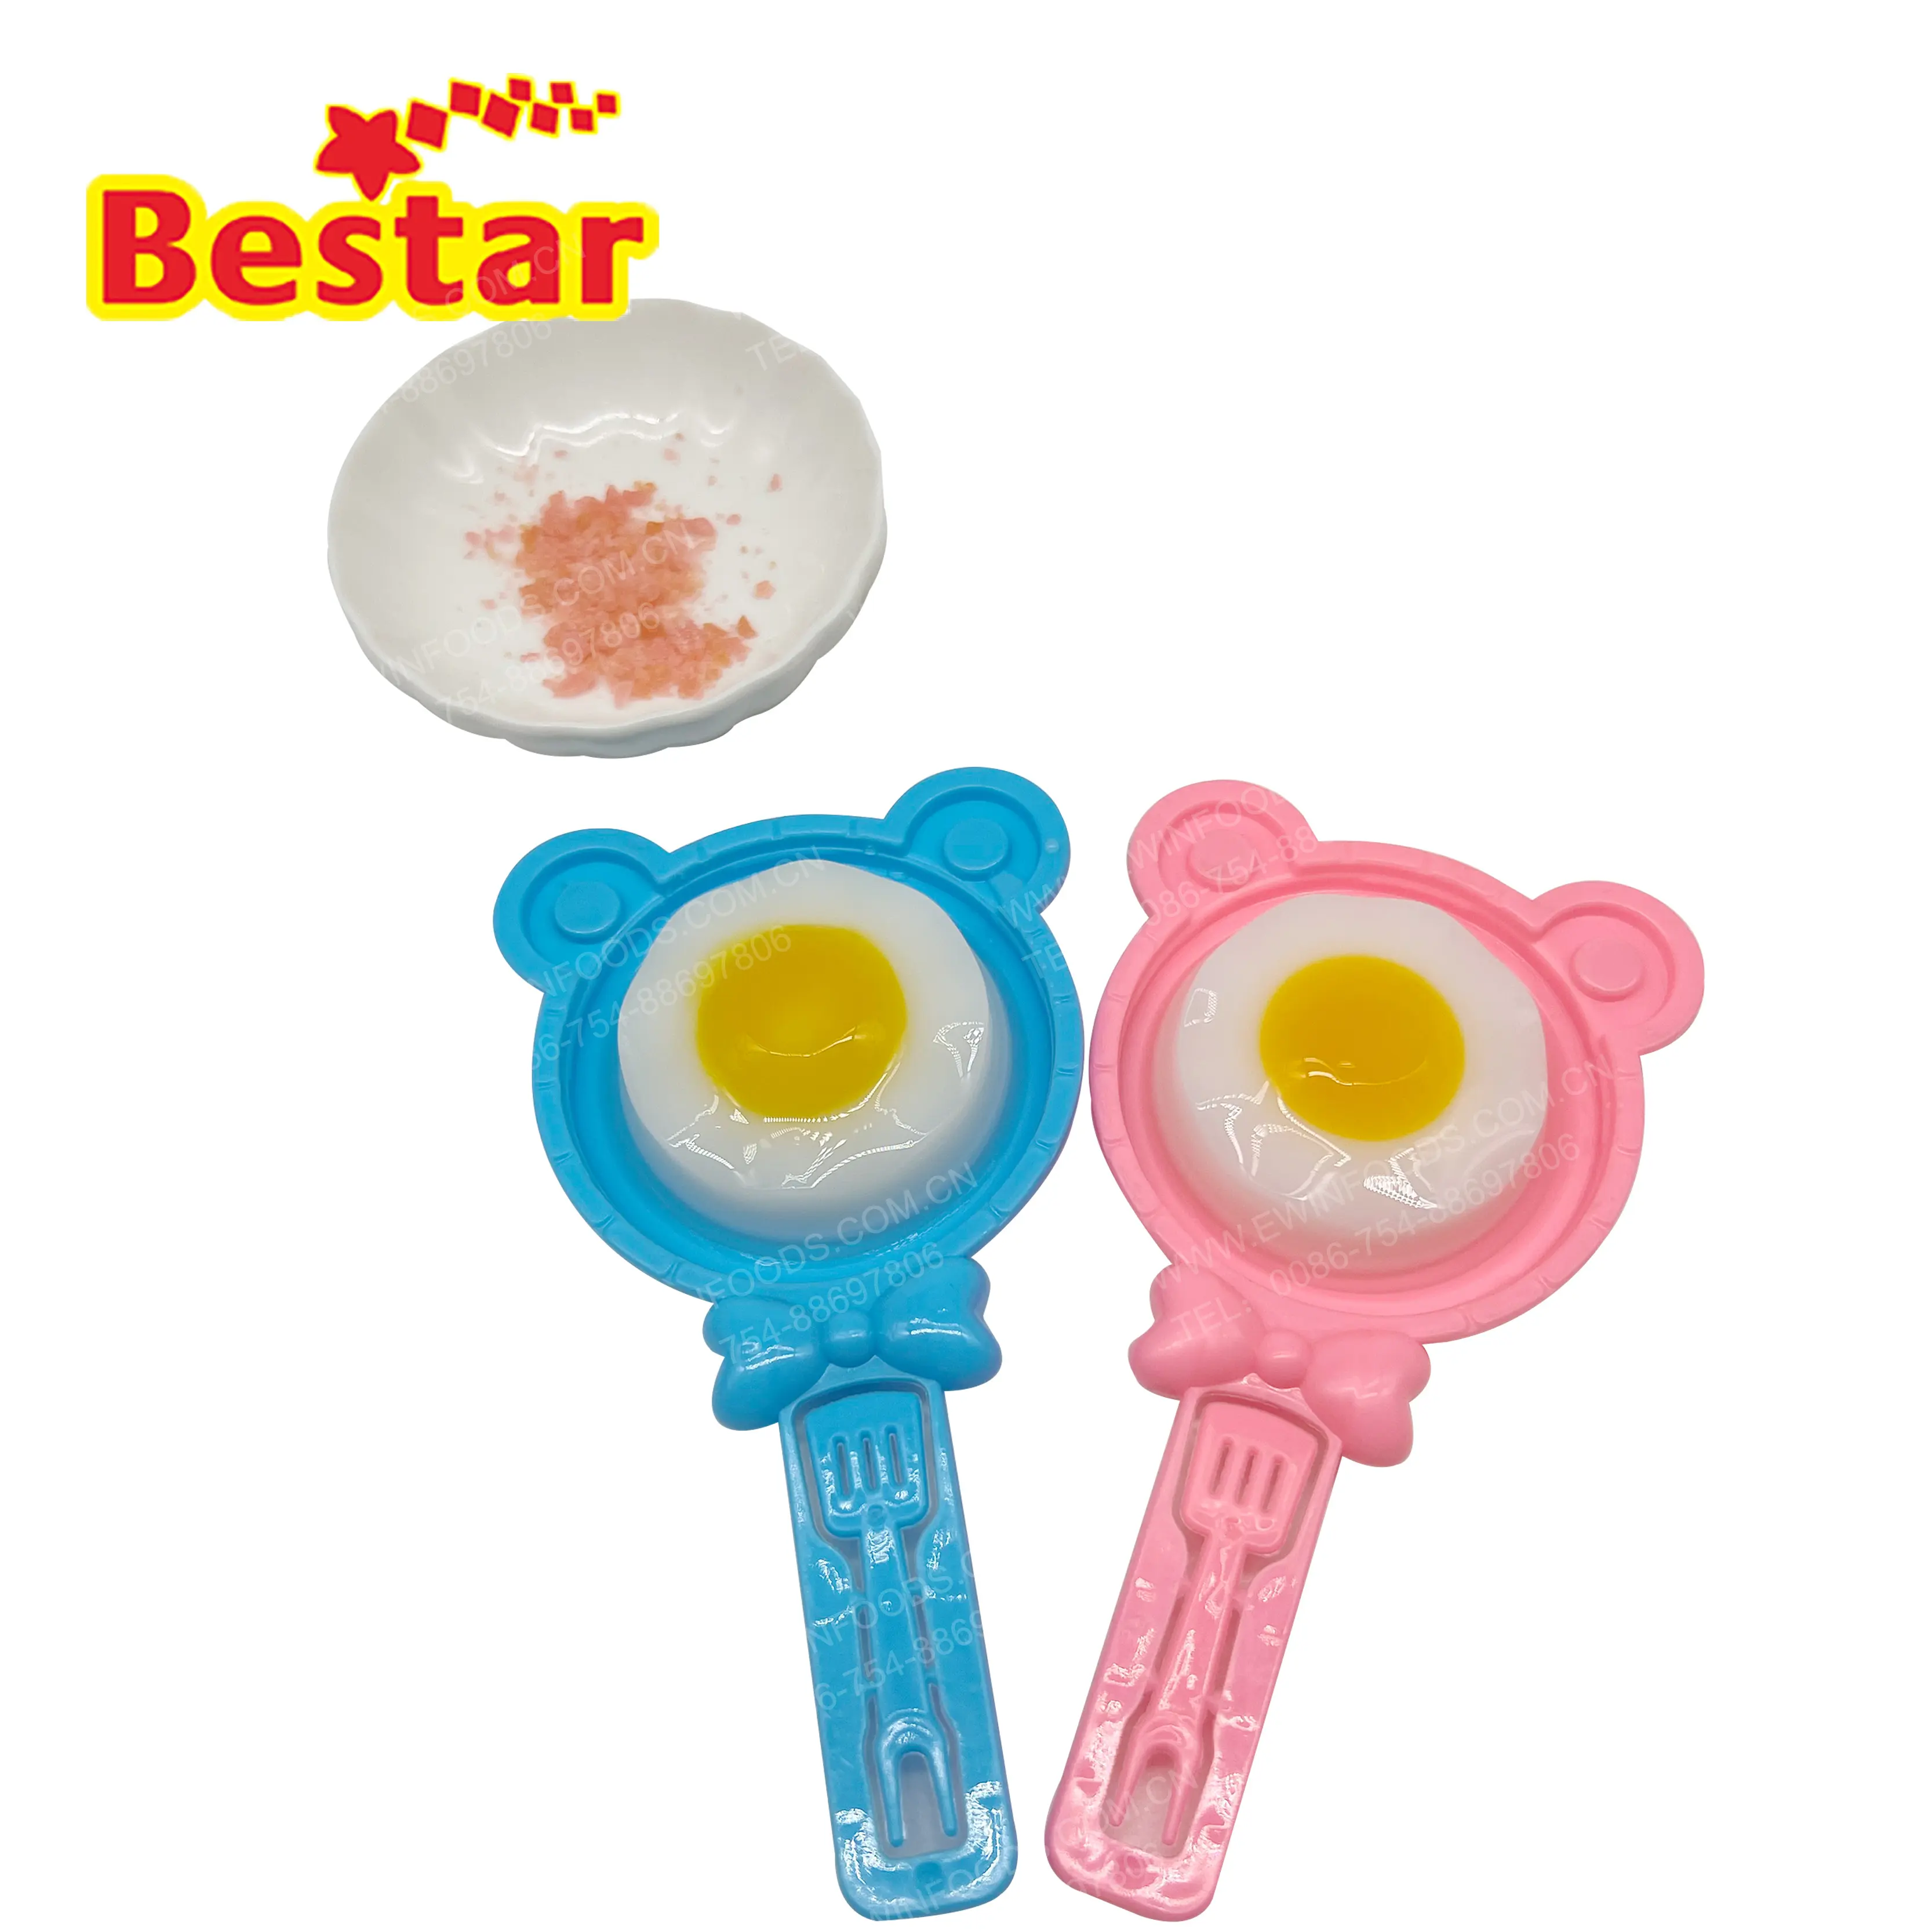 Egg soft candy wholesale funny bear shape egg gummy jelly kitchen candy toys for kids custom design e logo candy fornitore